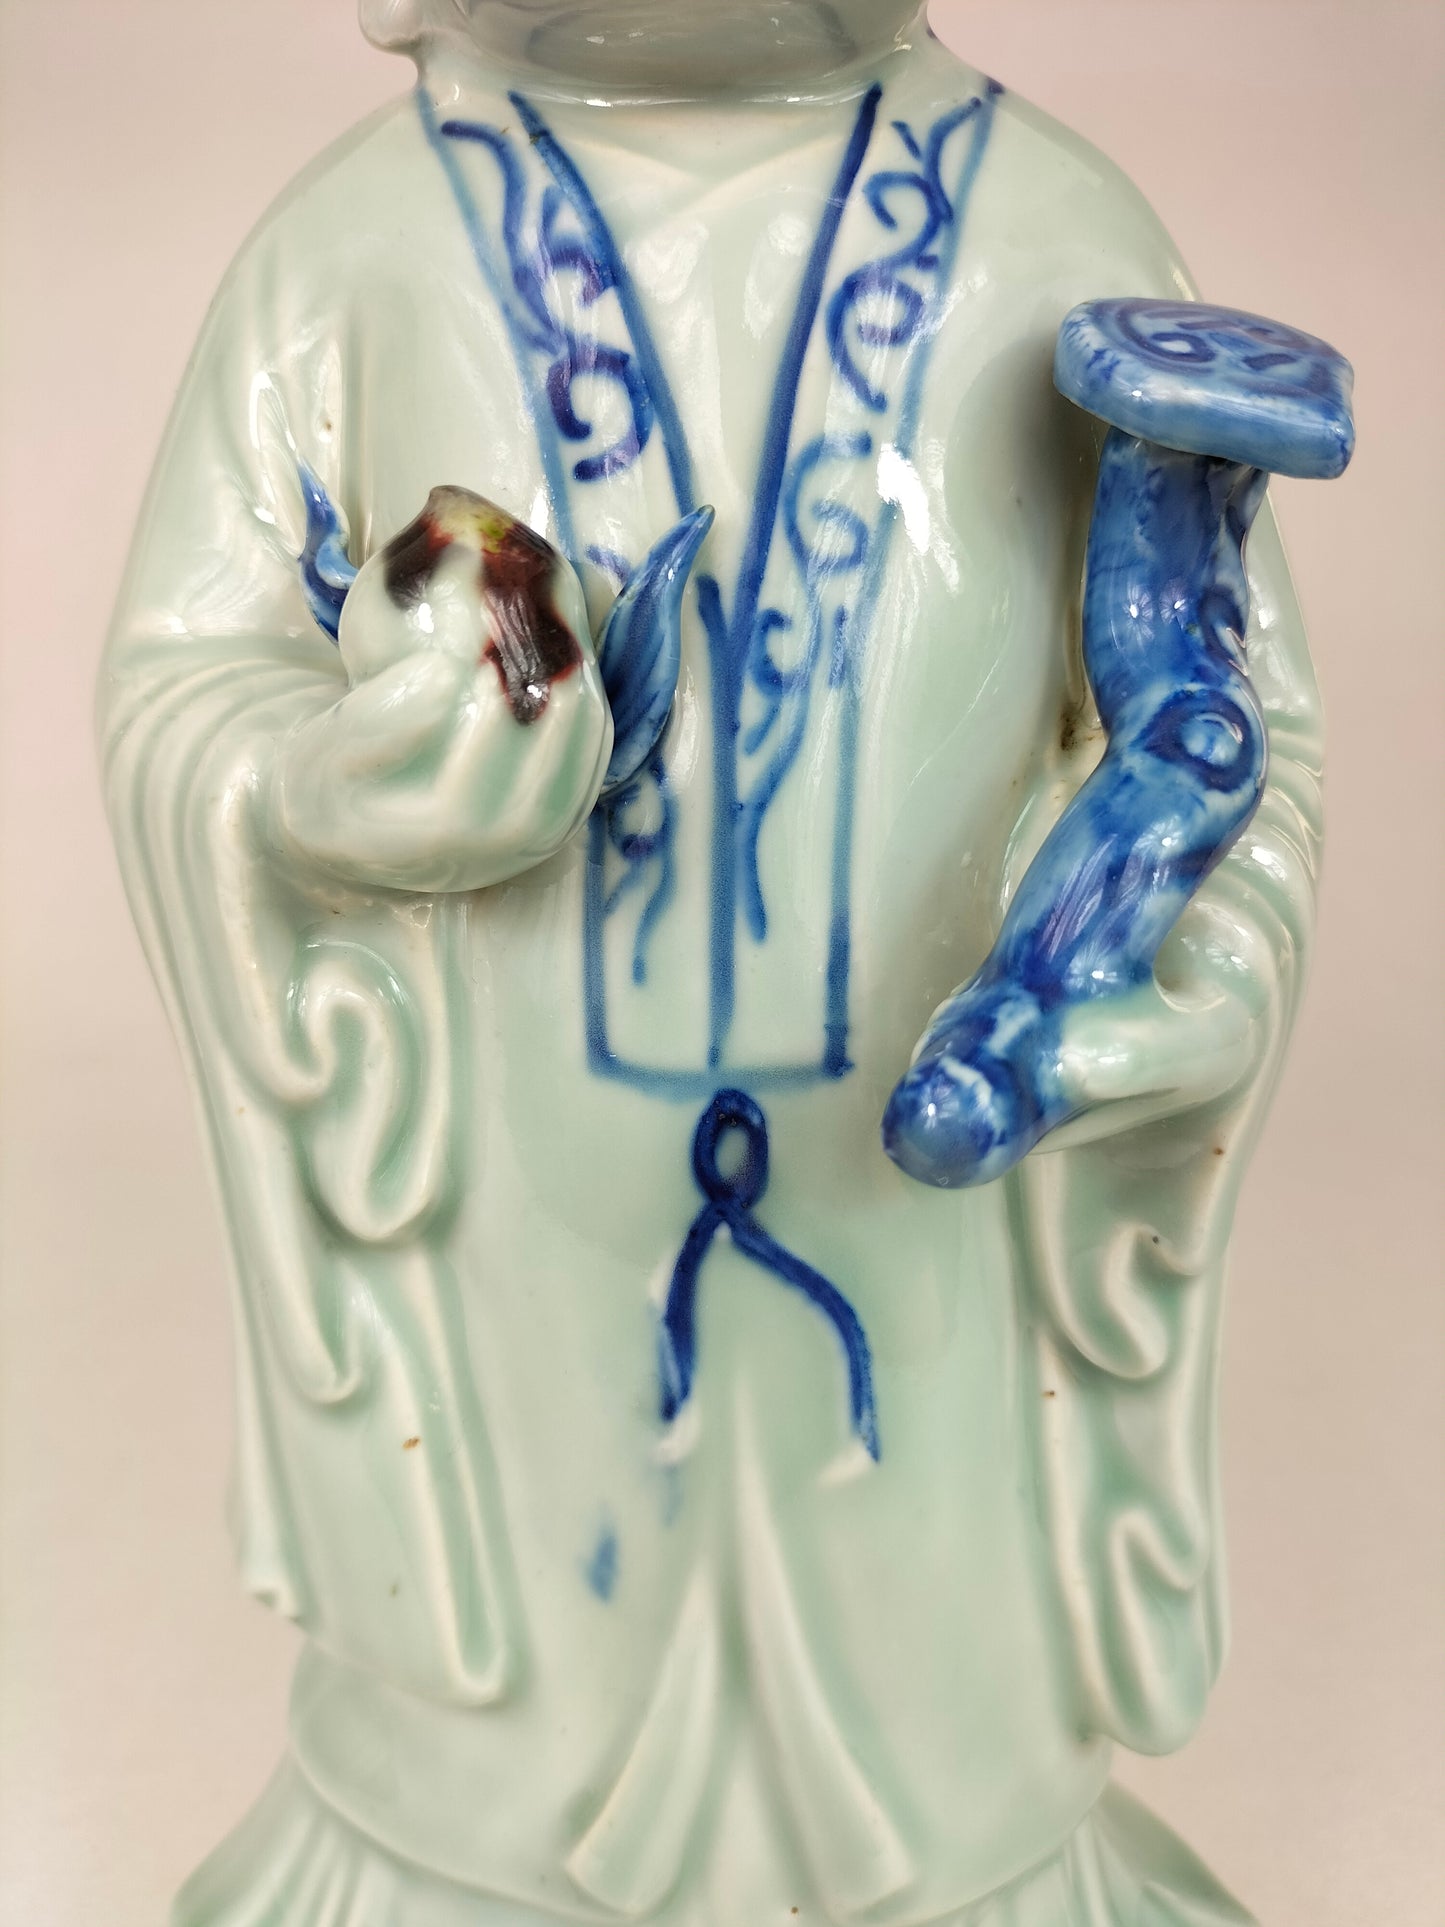 Chinese statue of Shou Lao // God of luck and fortune - 20th century